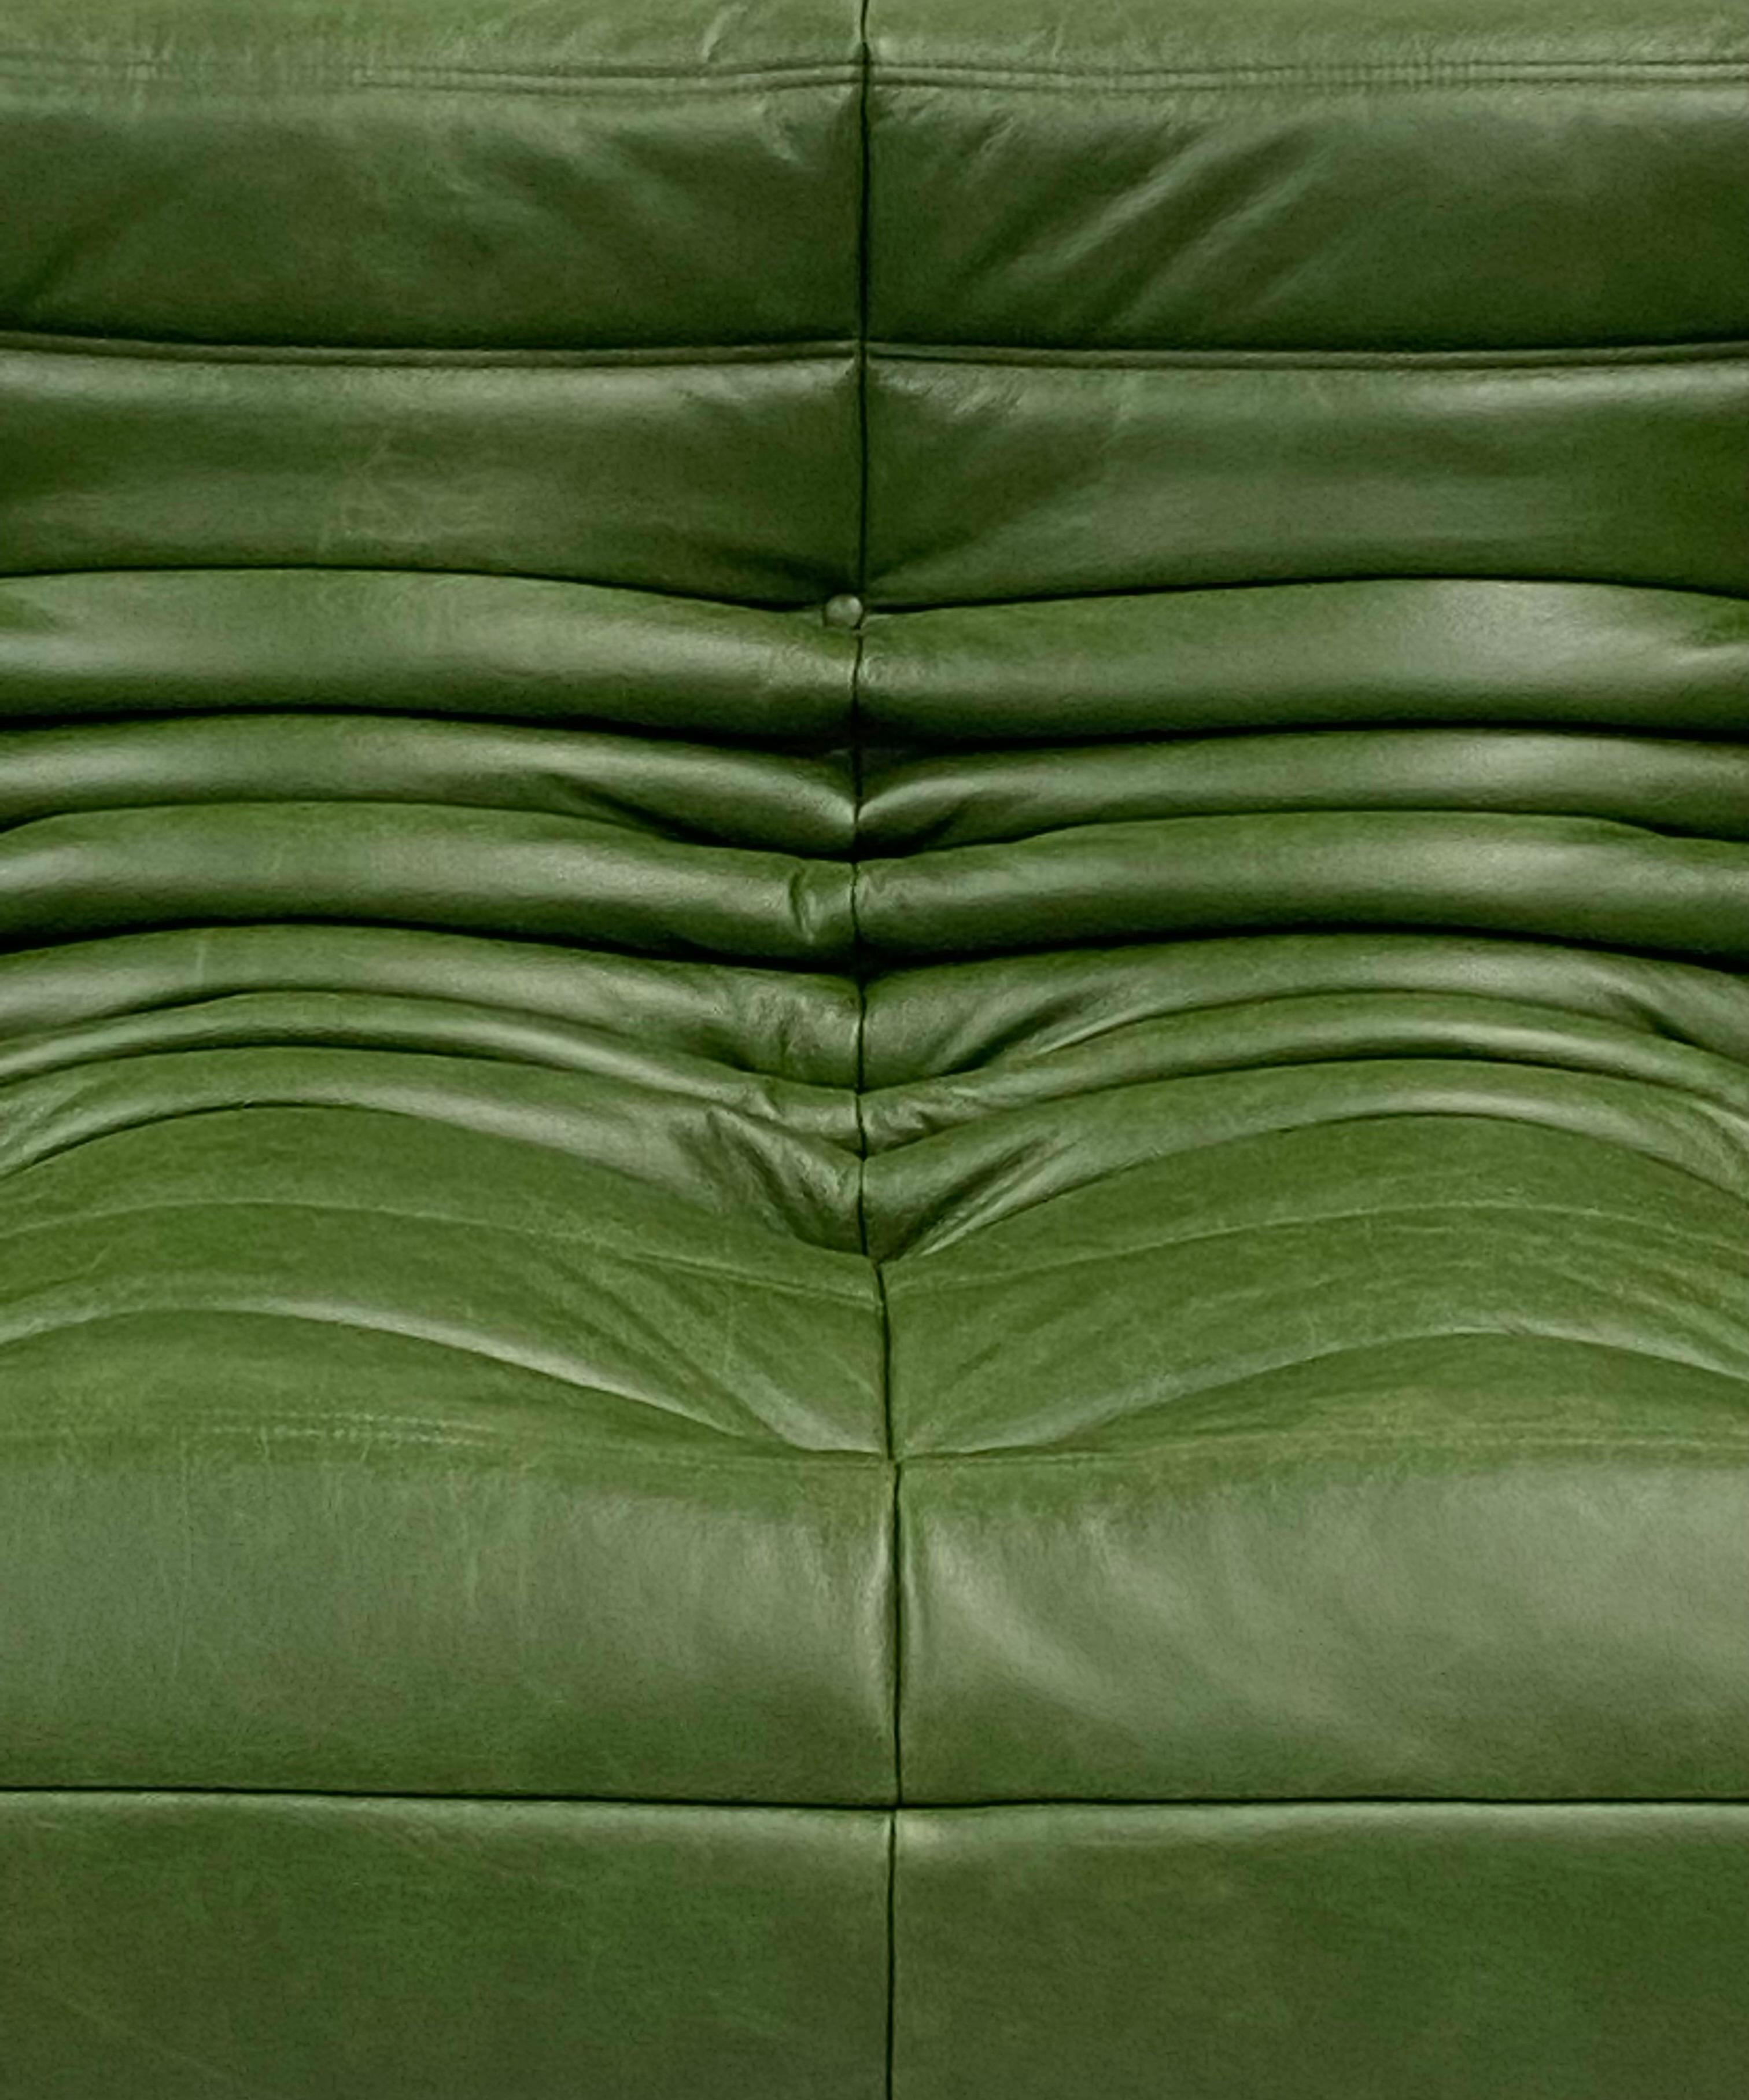 Mid-Century Modern French Vintage Togo Sofa in Green  Leather by Michel Ducaroy for Ligne Roset.